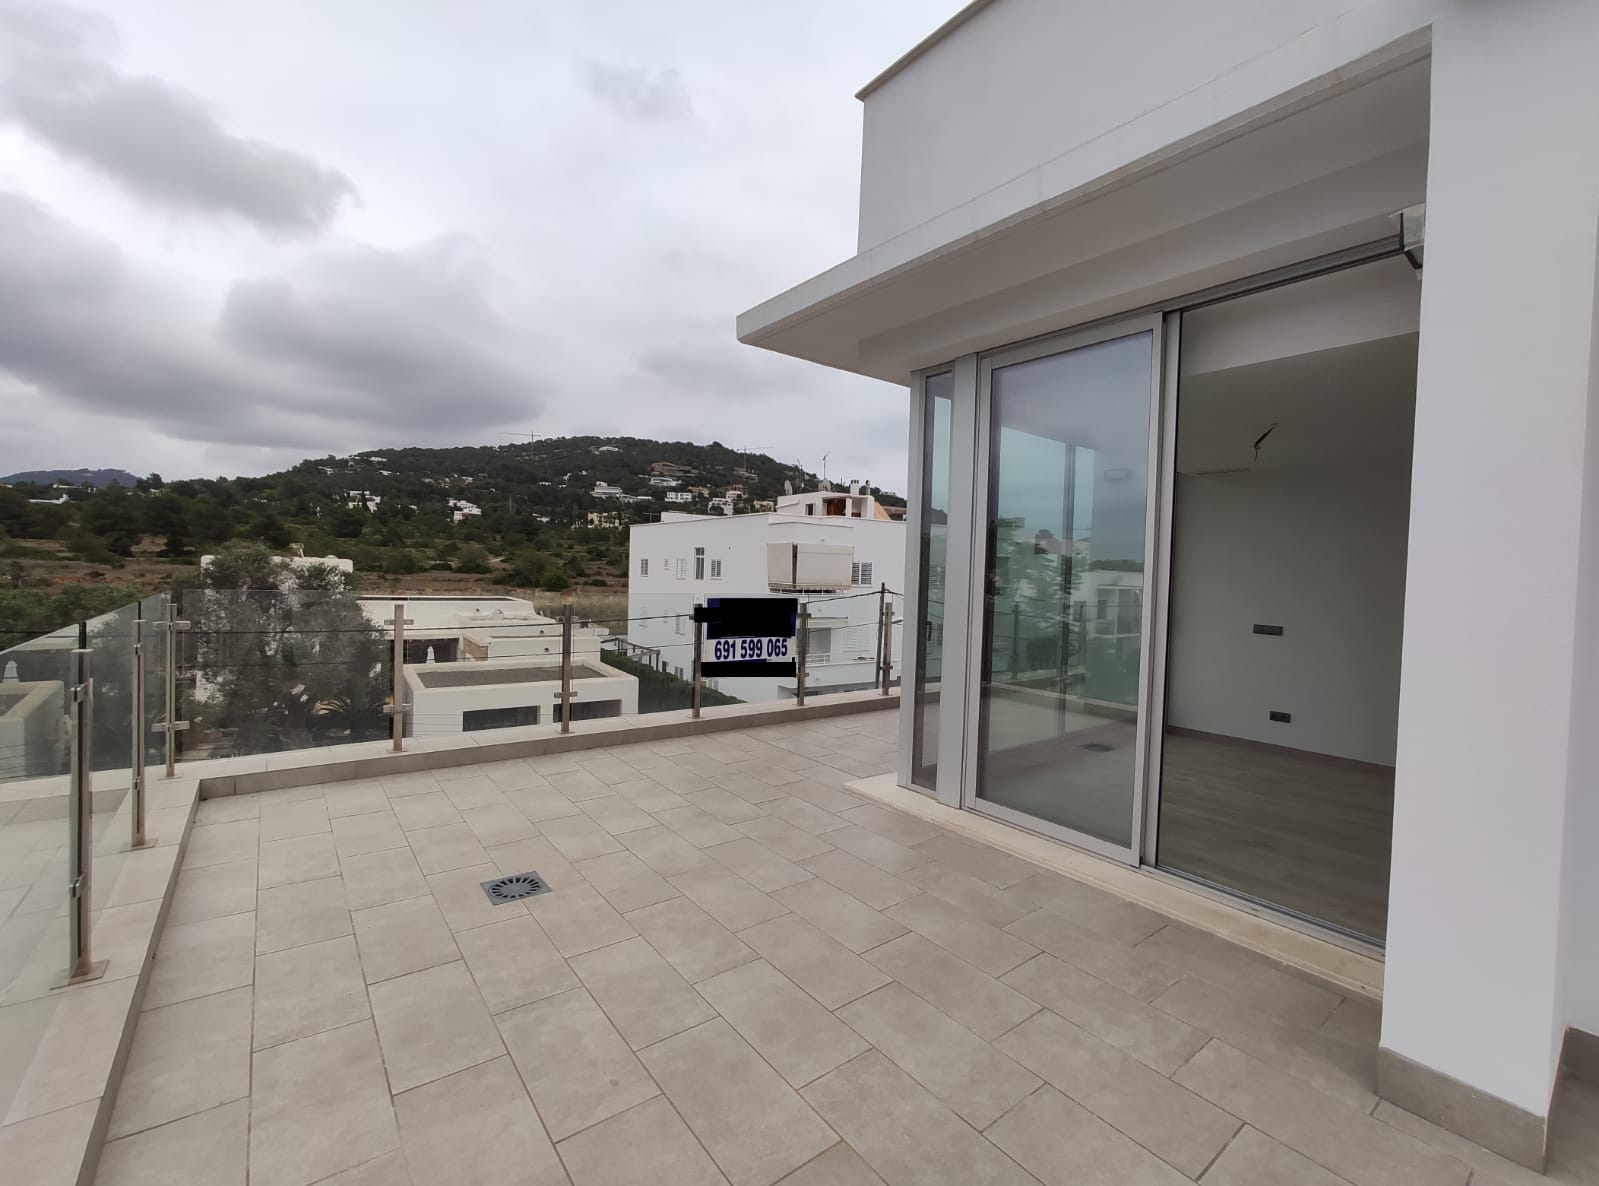 Newly built penthouse in the center of Jesus of 100m2